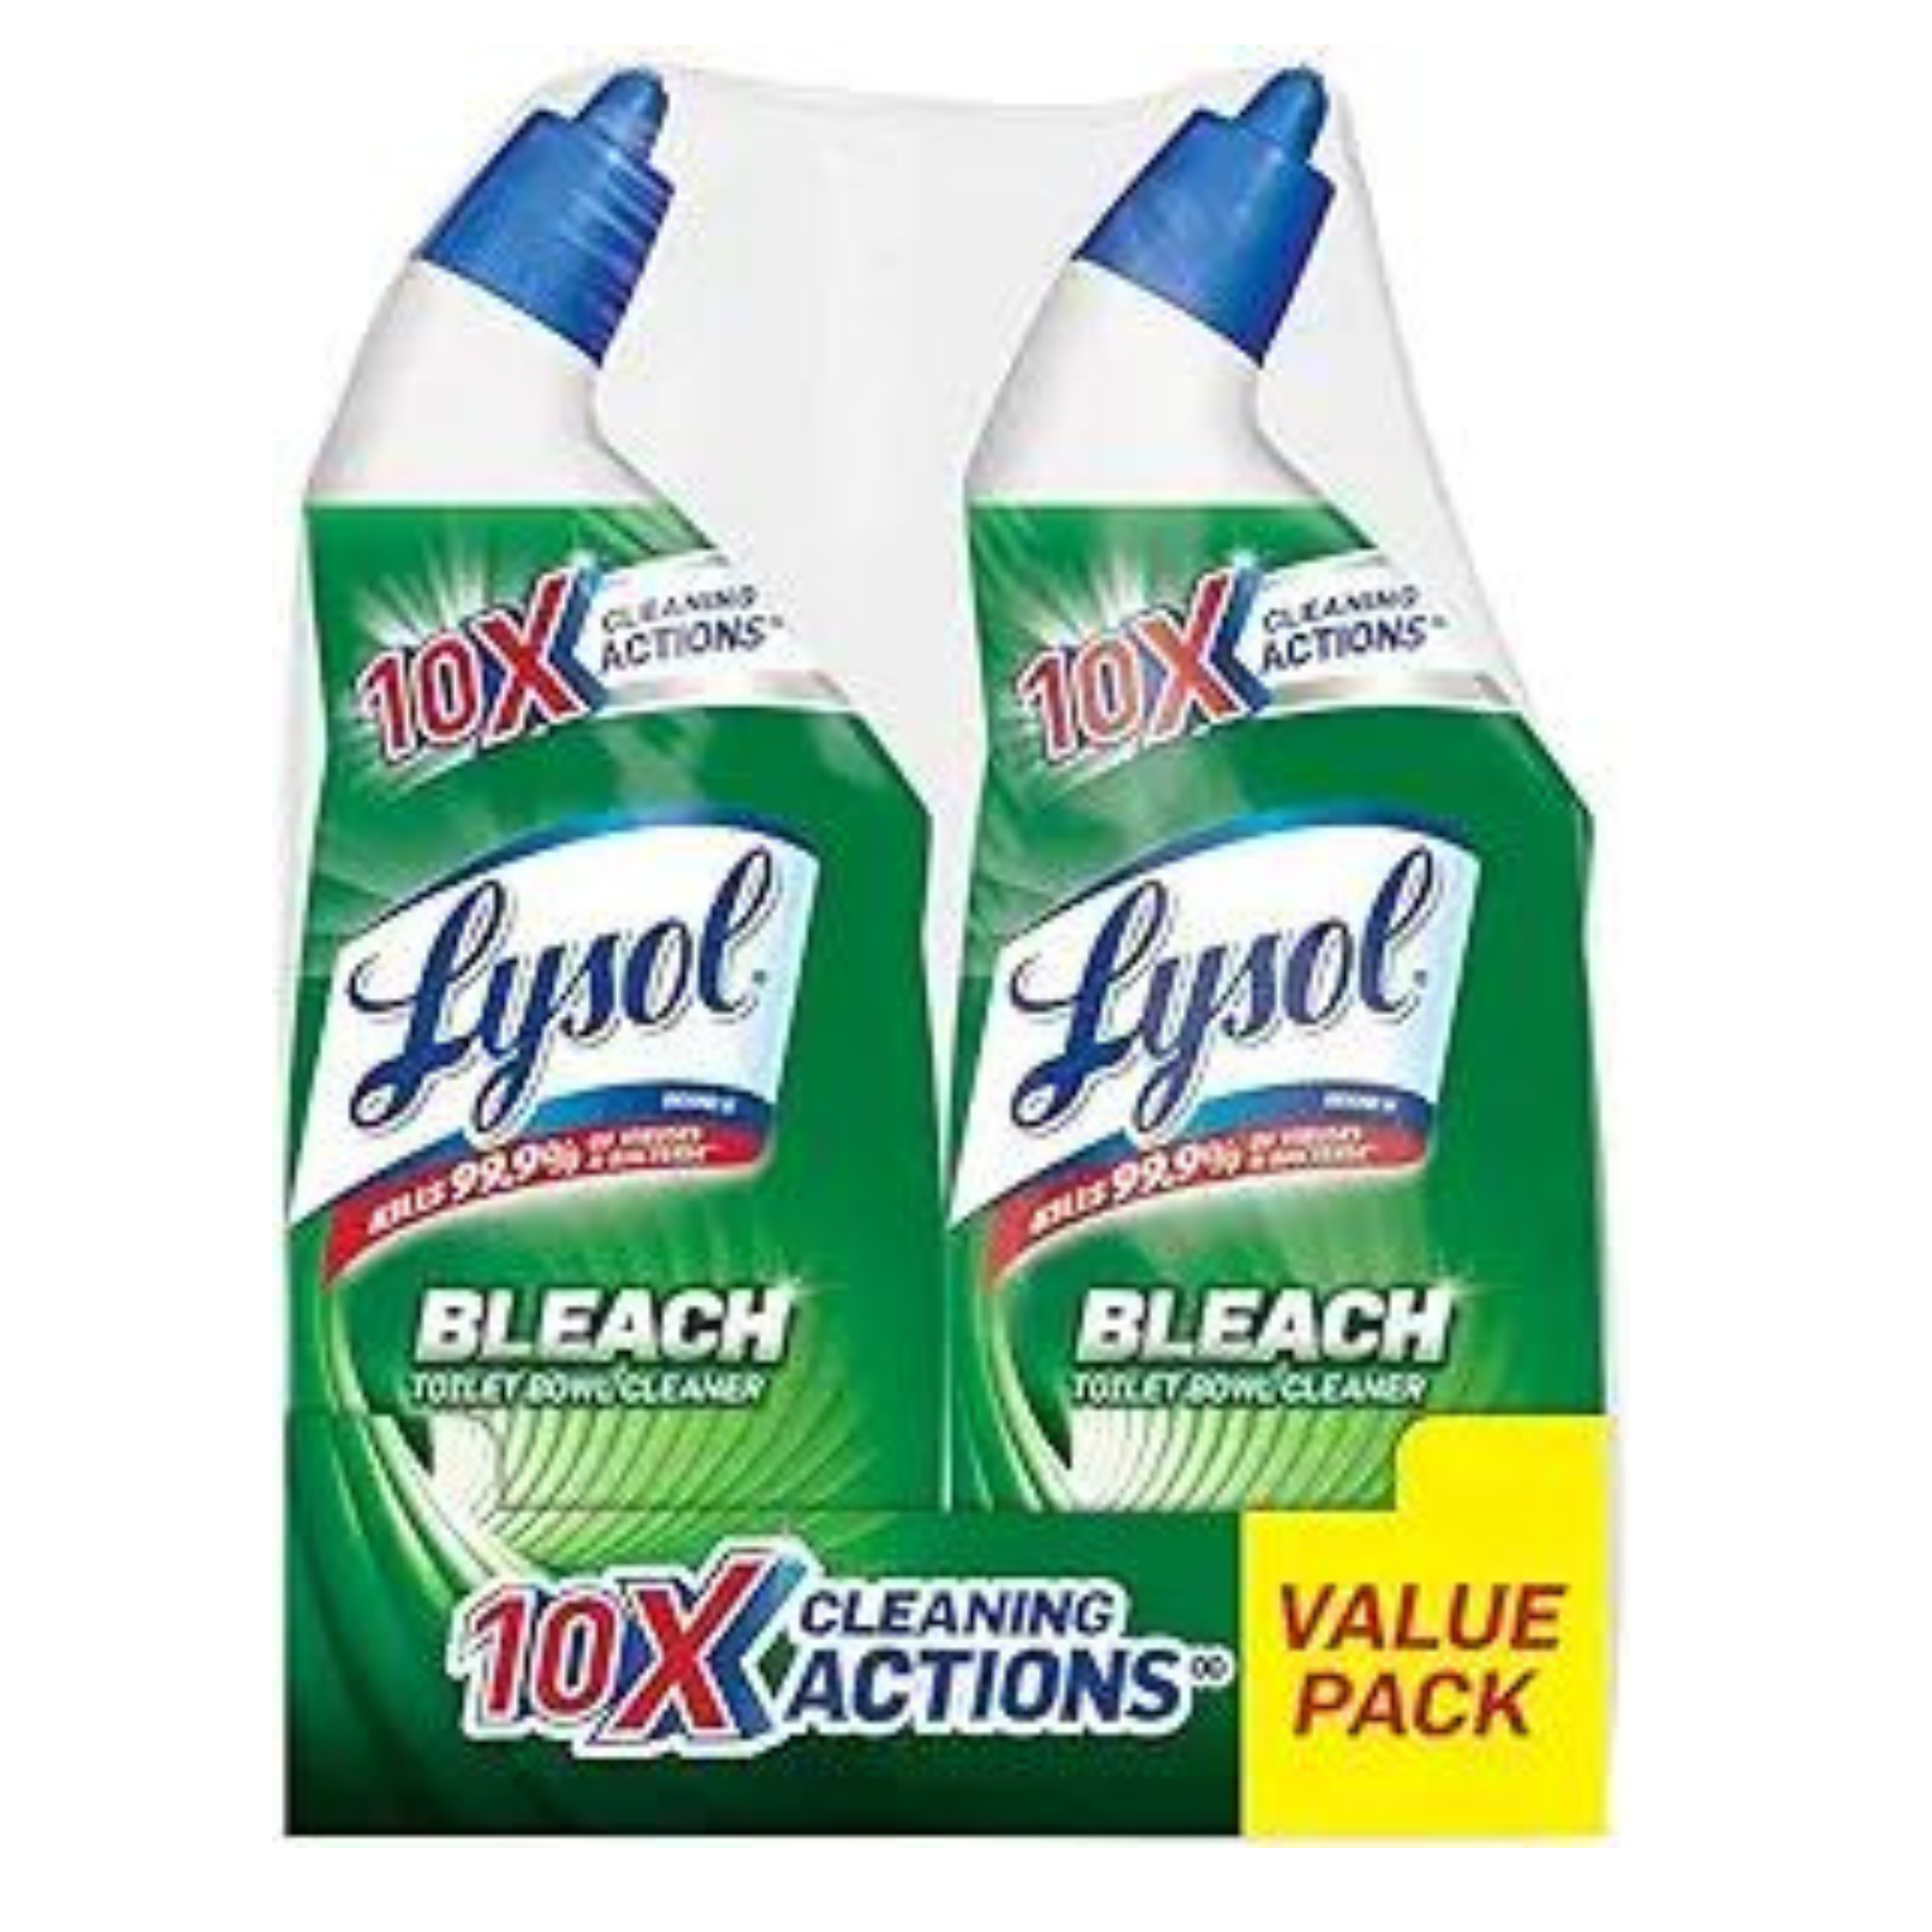 2 Bottles Of Lysol Bleach Toilet Bowl Cleaner 10X Cleaning Actions